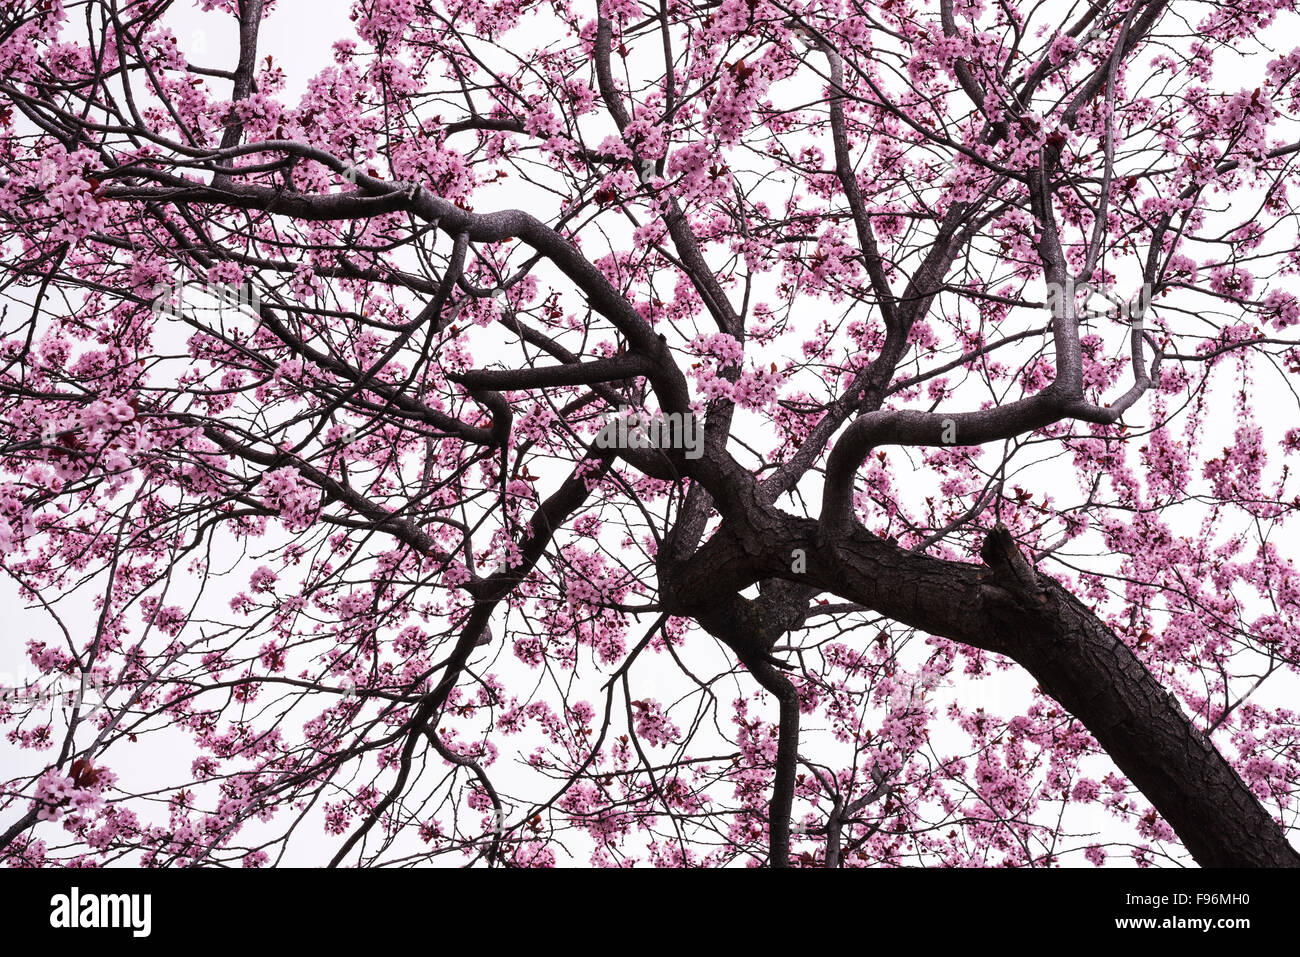 Cherry blossom tree with pink flowers in full bloom Stock Photo